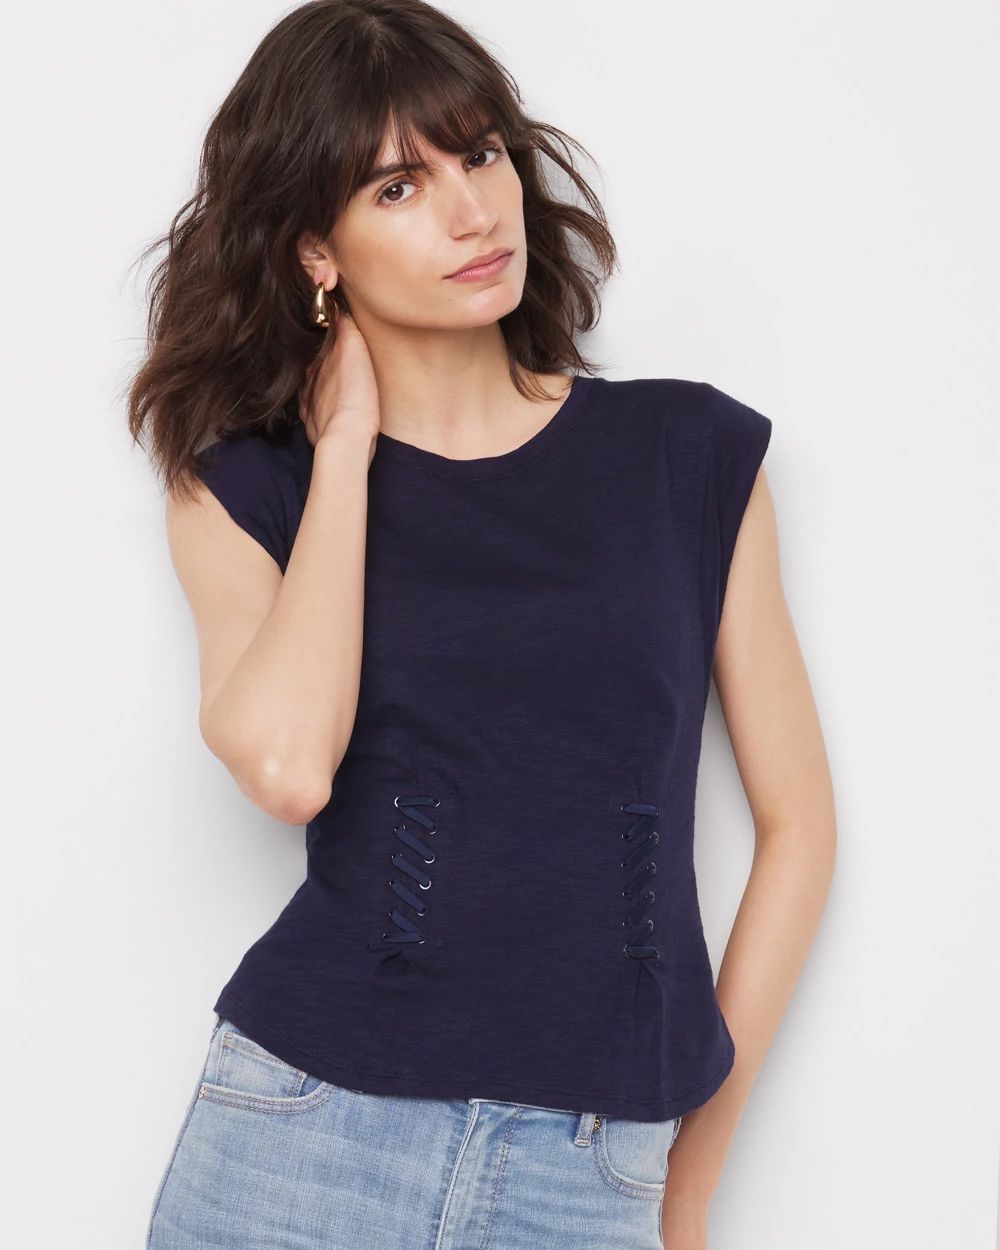 Lace-Up Bodice Tee click to view larger image.